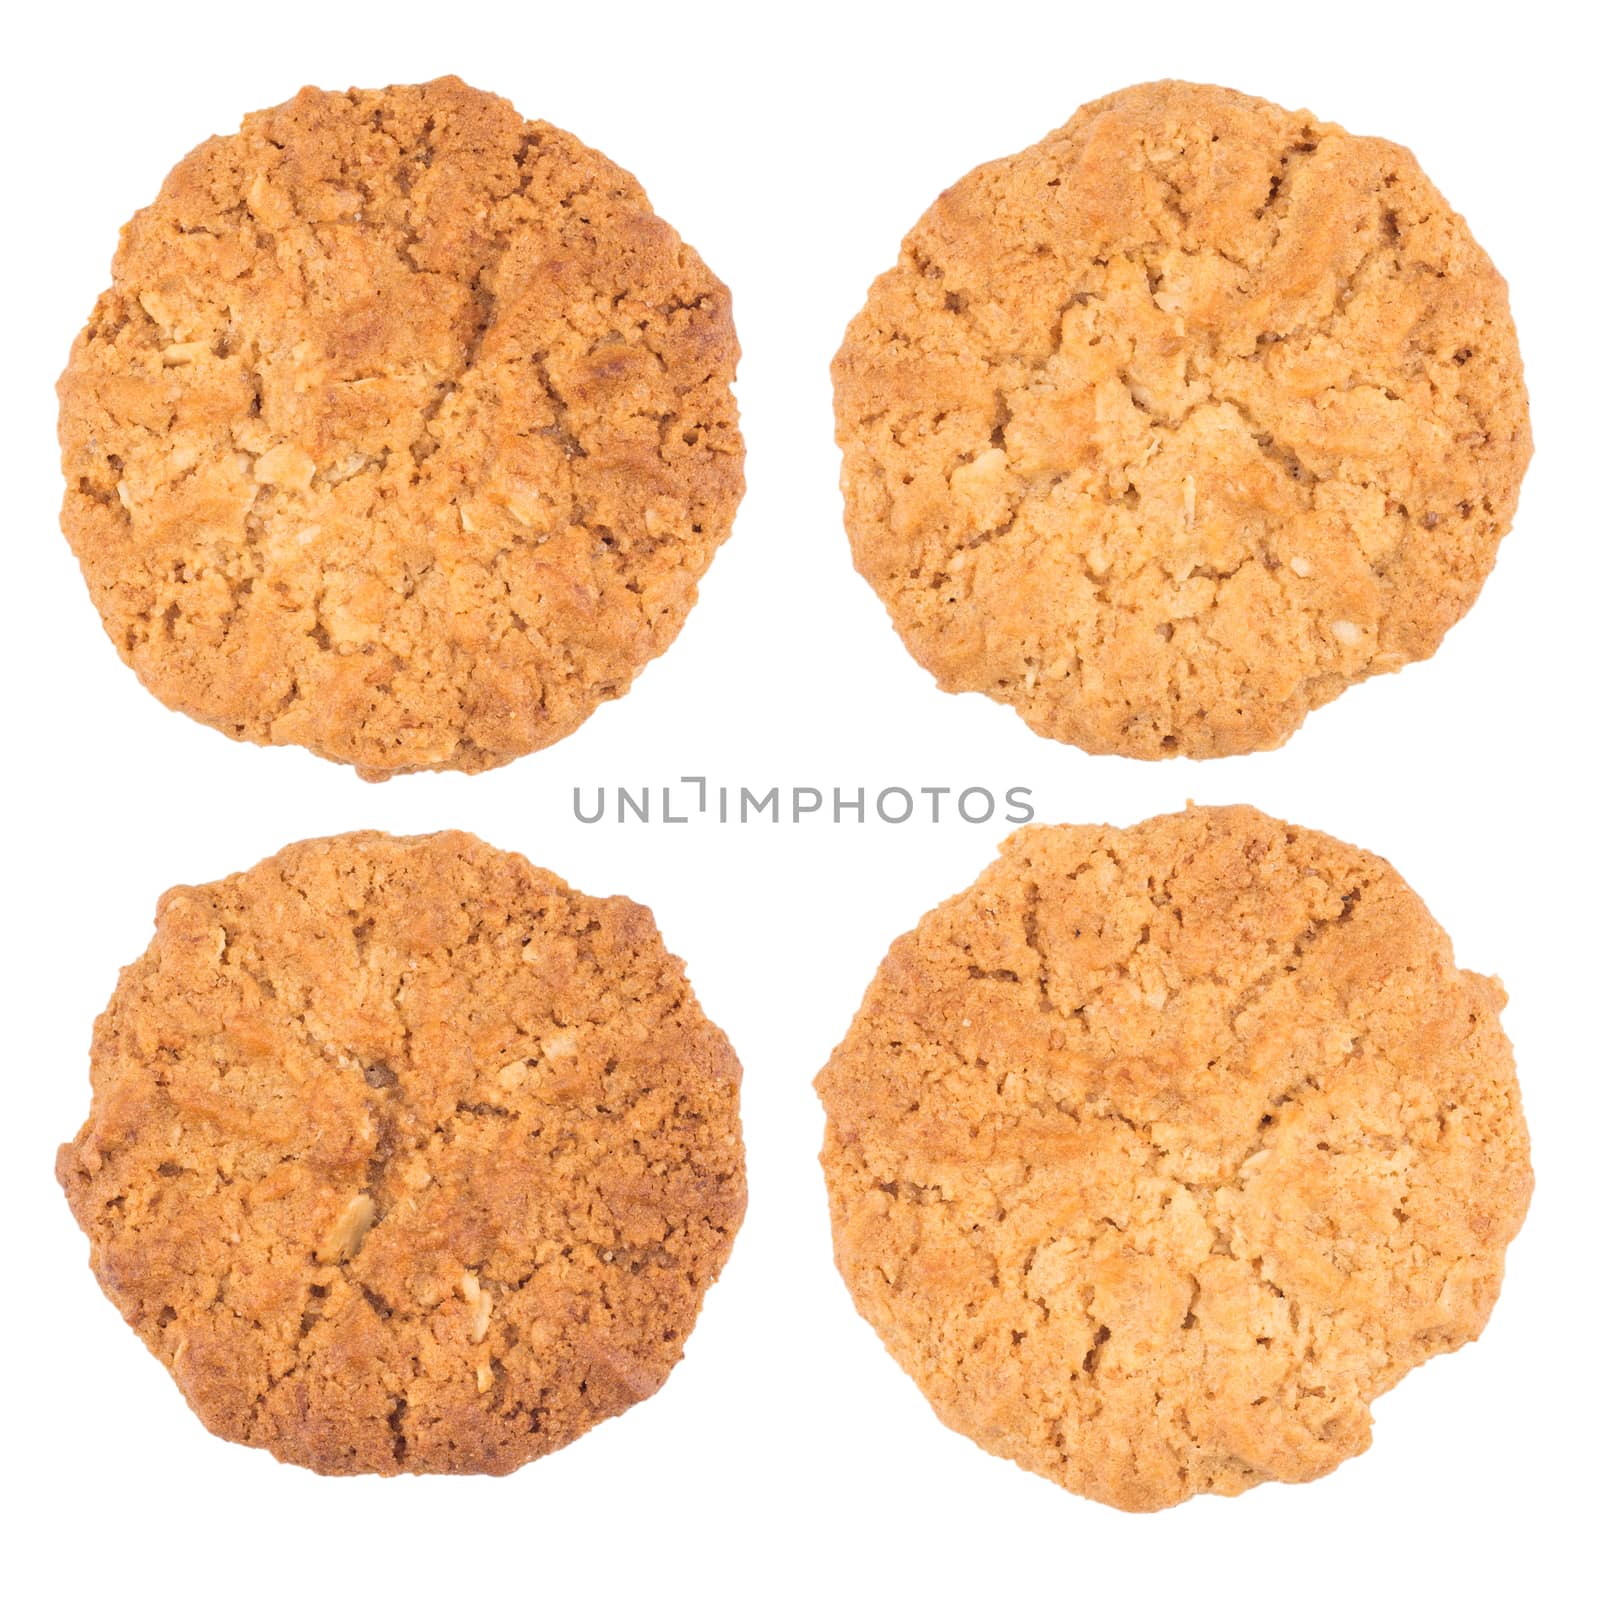 Cookies on a white background by DGolbay